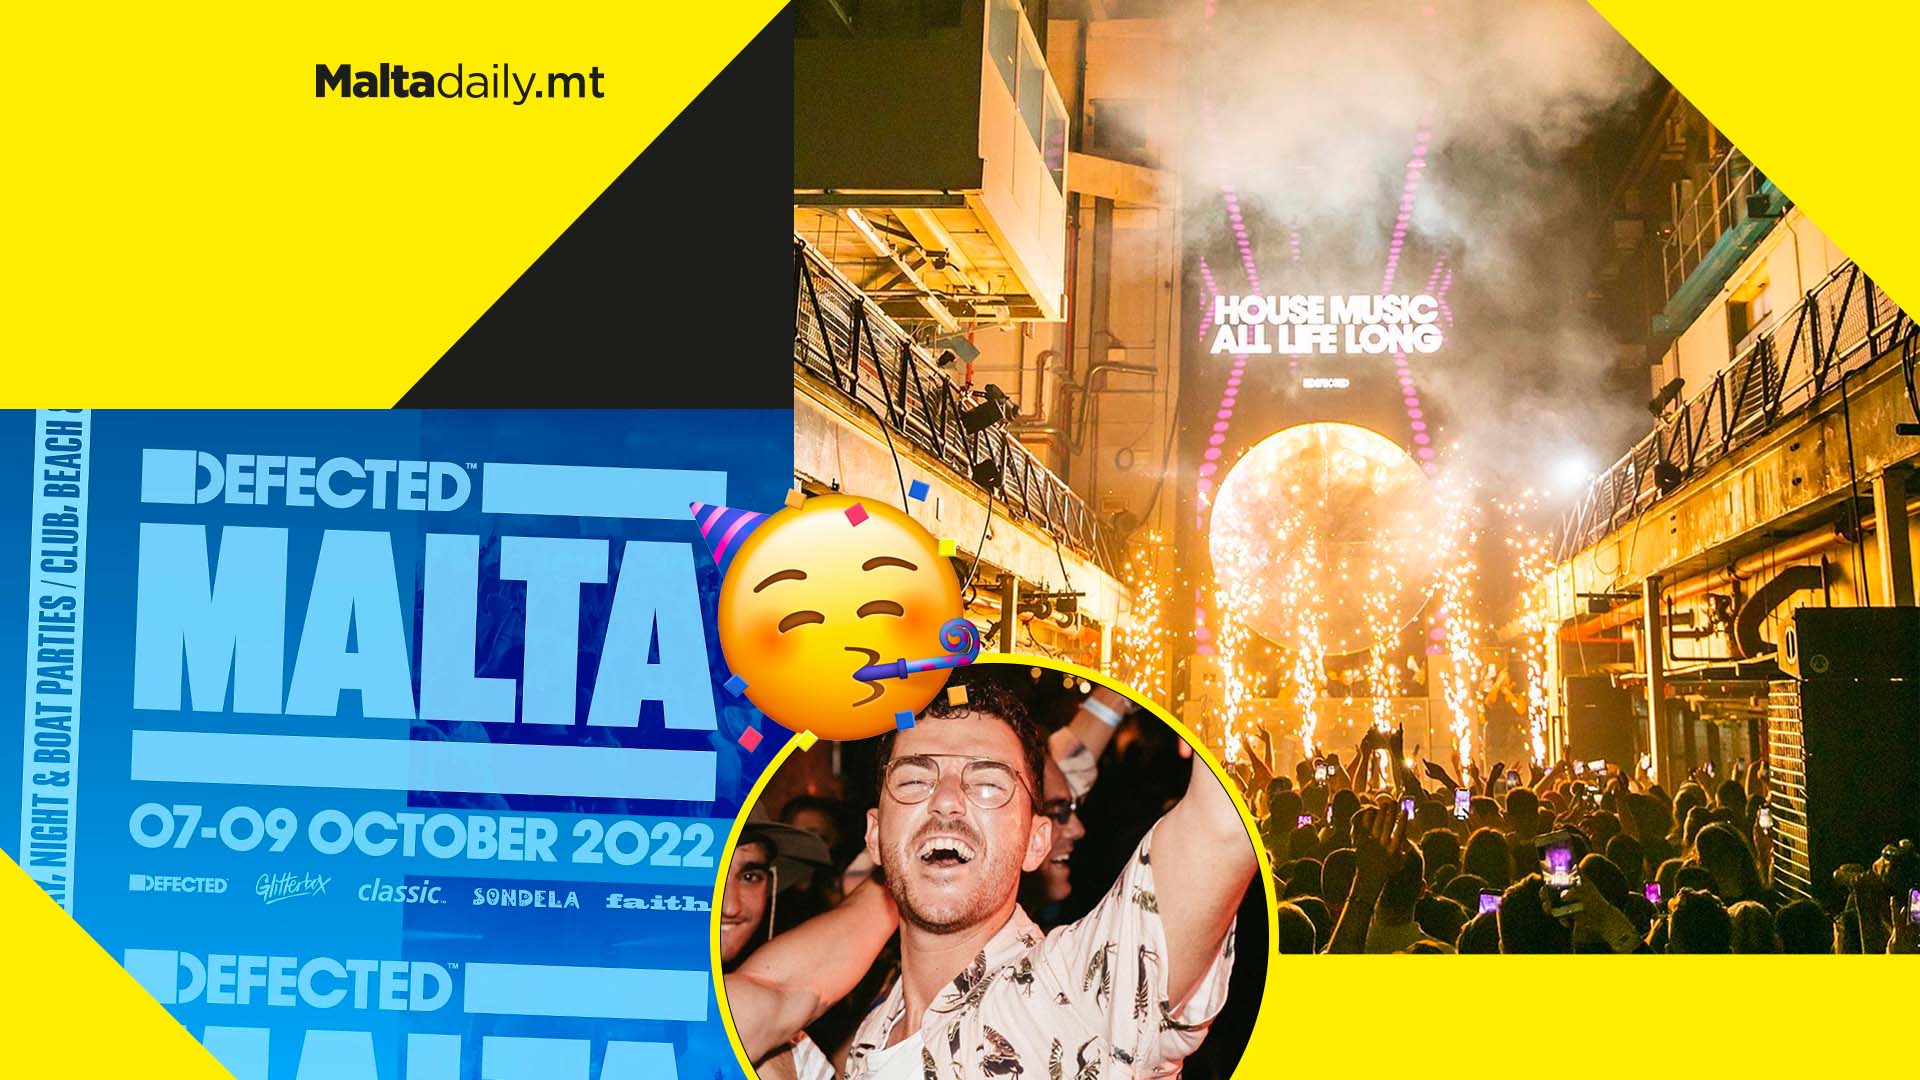 Legendary house label Defected Records coming to Malta for 3-day festival